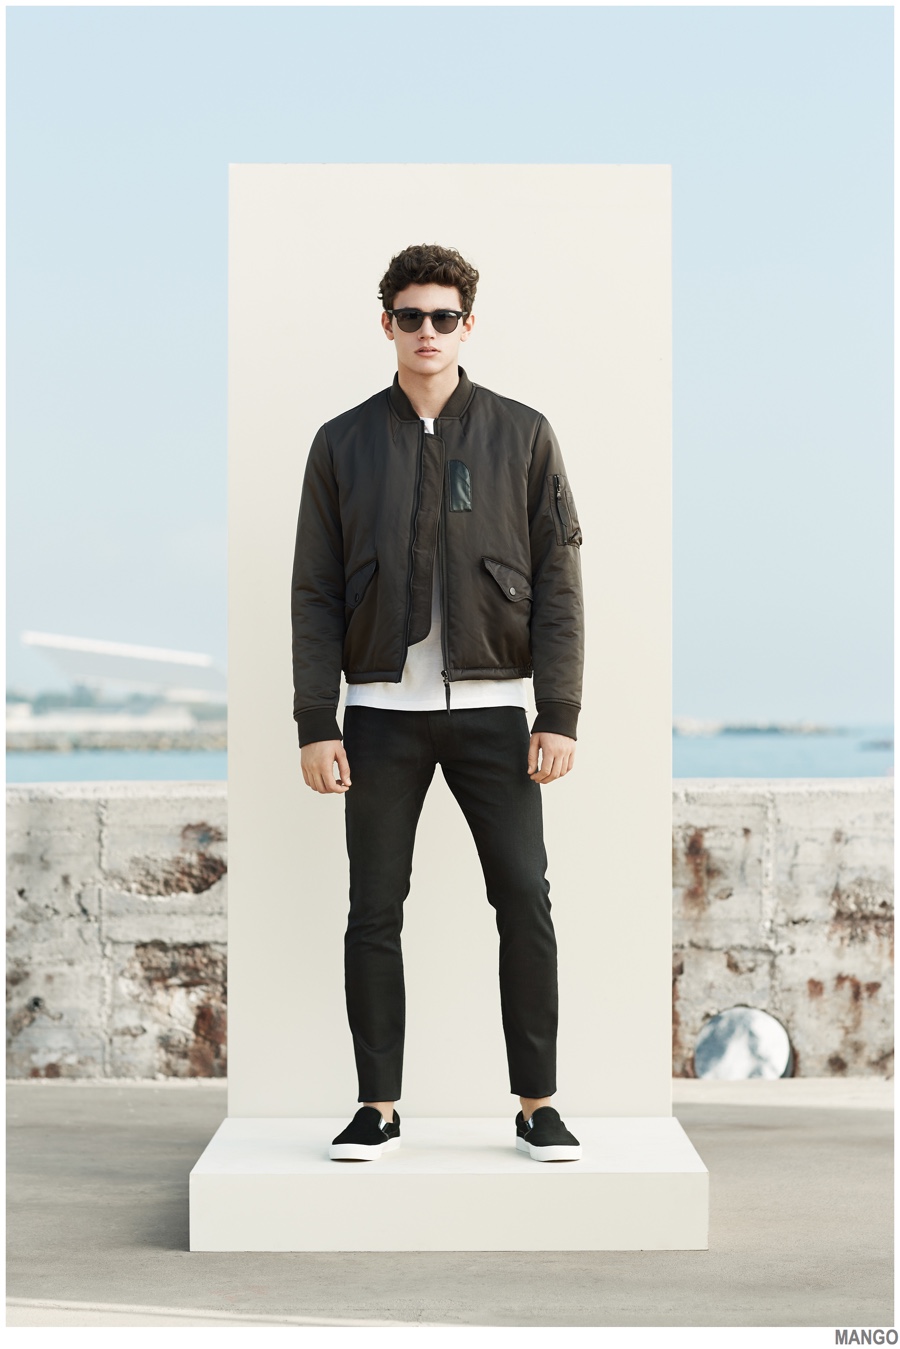 Mango Embraces Diverse Trends for Men's Spring/Summer 2015 Collection